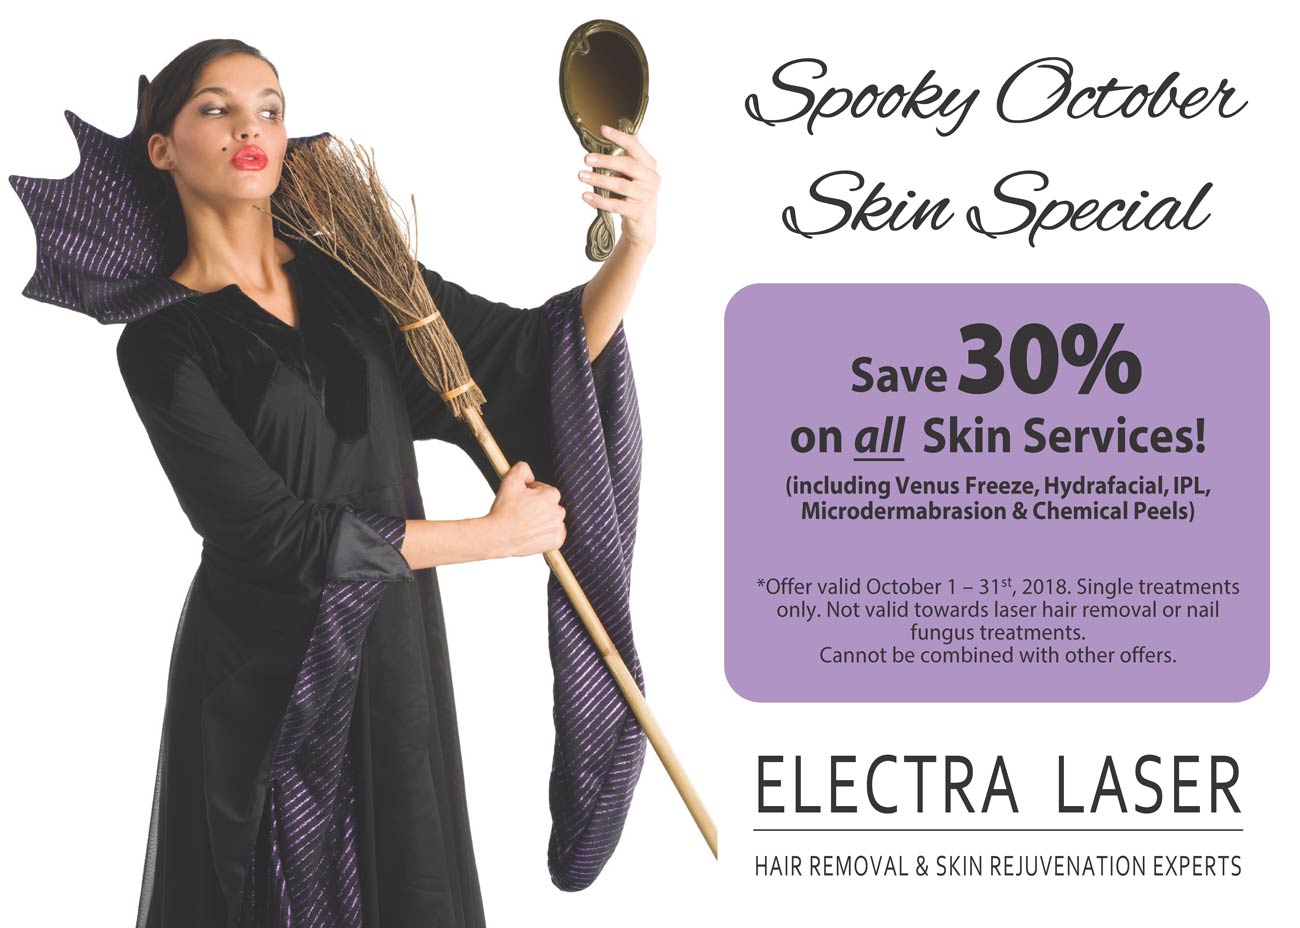 Save 30% on skin services.